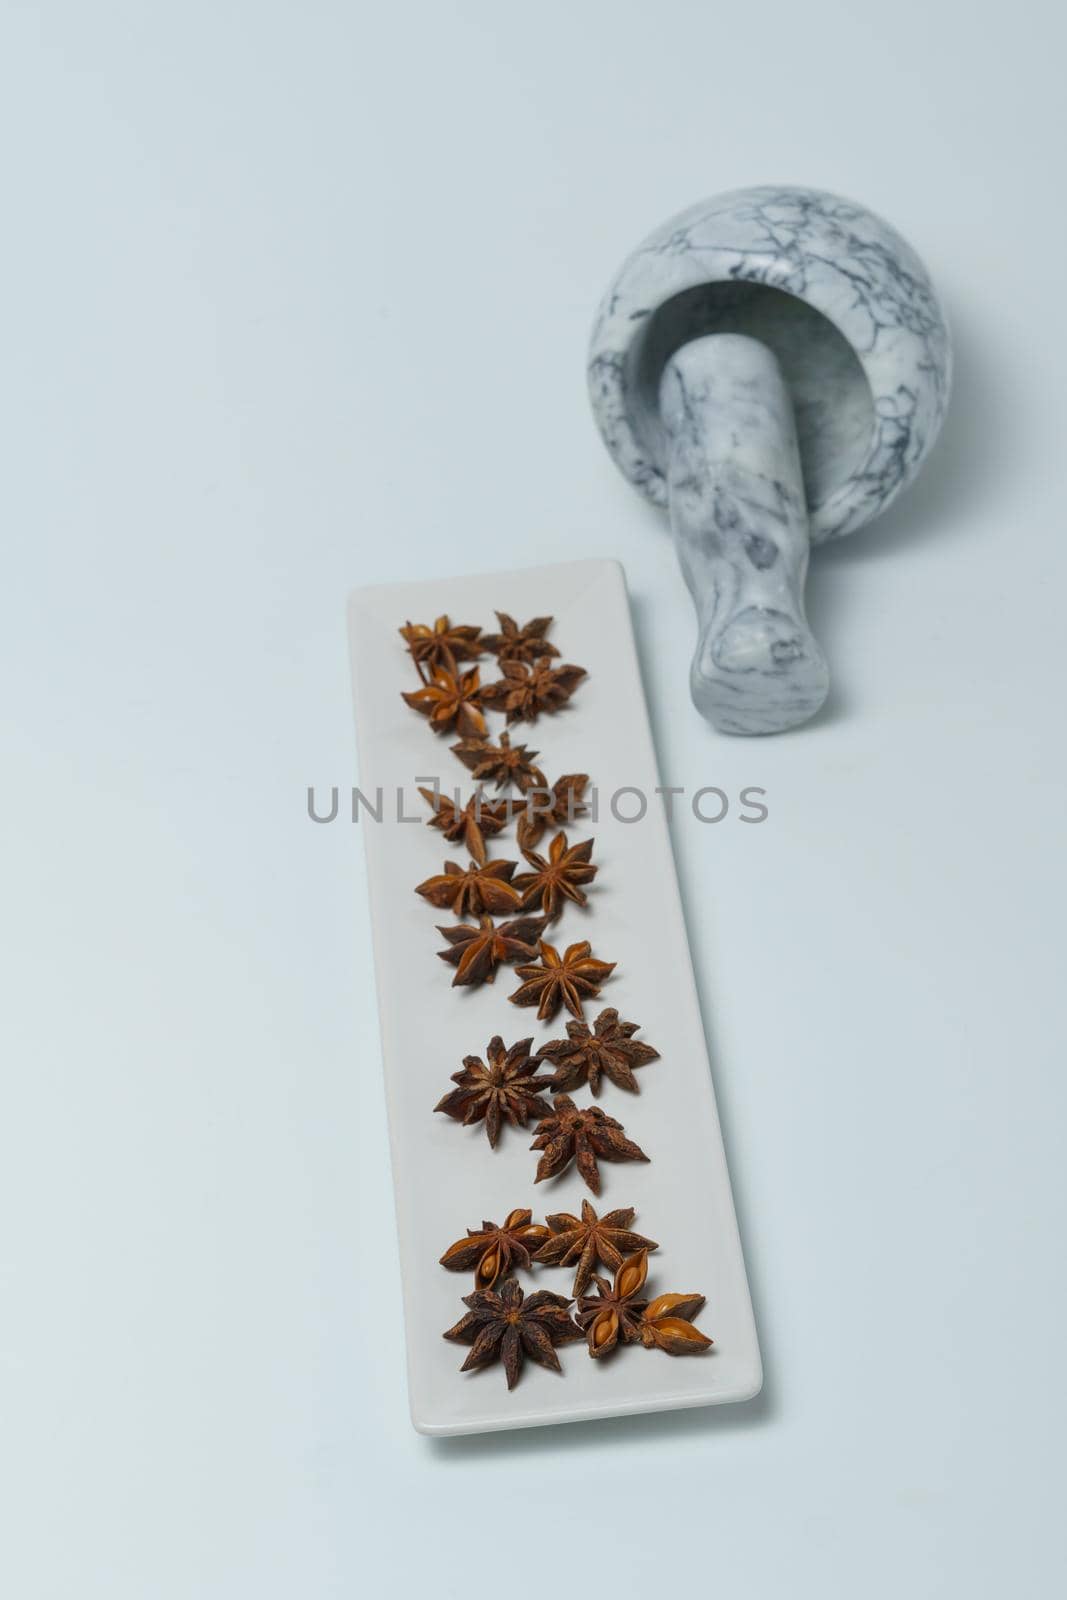 star anise illicium verum with a marble pestle and mortar by joseantona